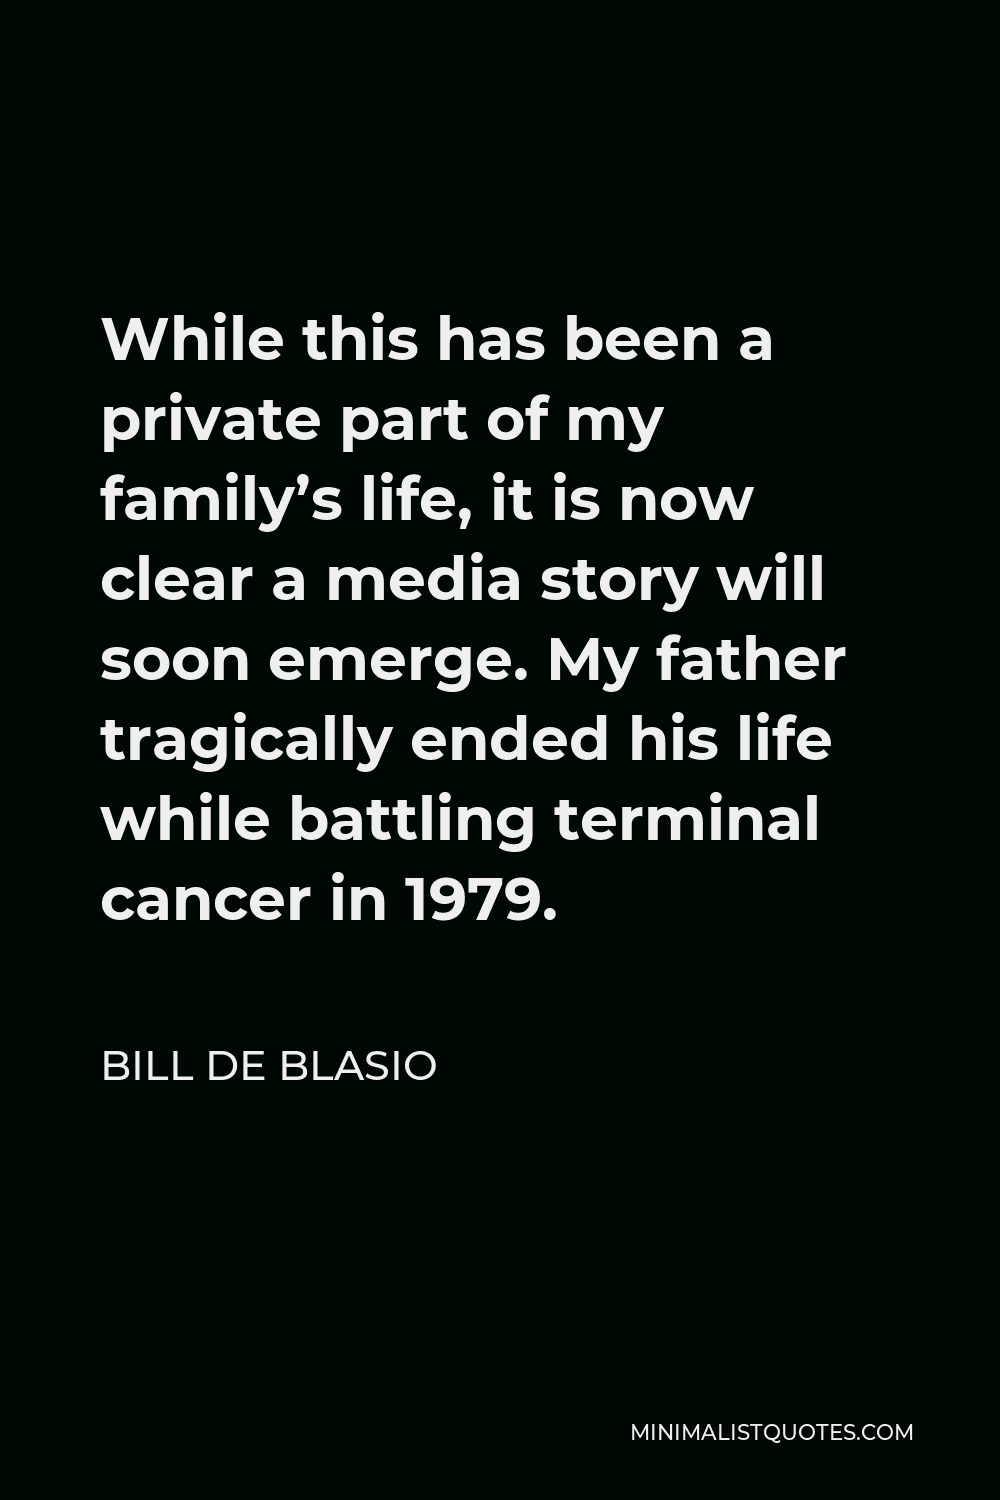 Bill de Blasio Quote - While this has been a private part of my family’s life, it is now clear a media story will soon emerge. My father tragically ended his life while battling terminal cancer in 1979.